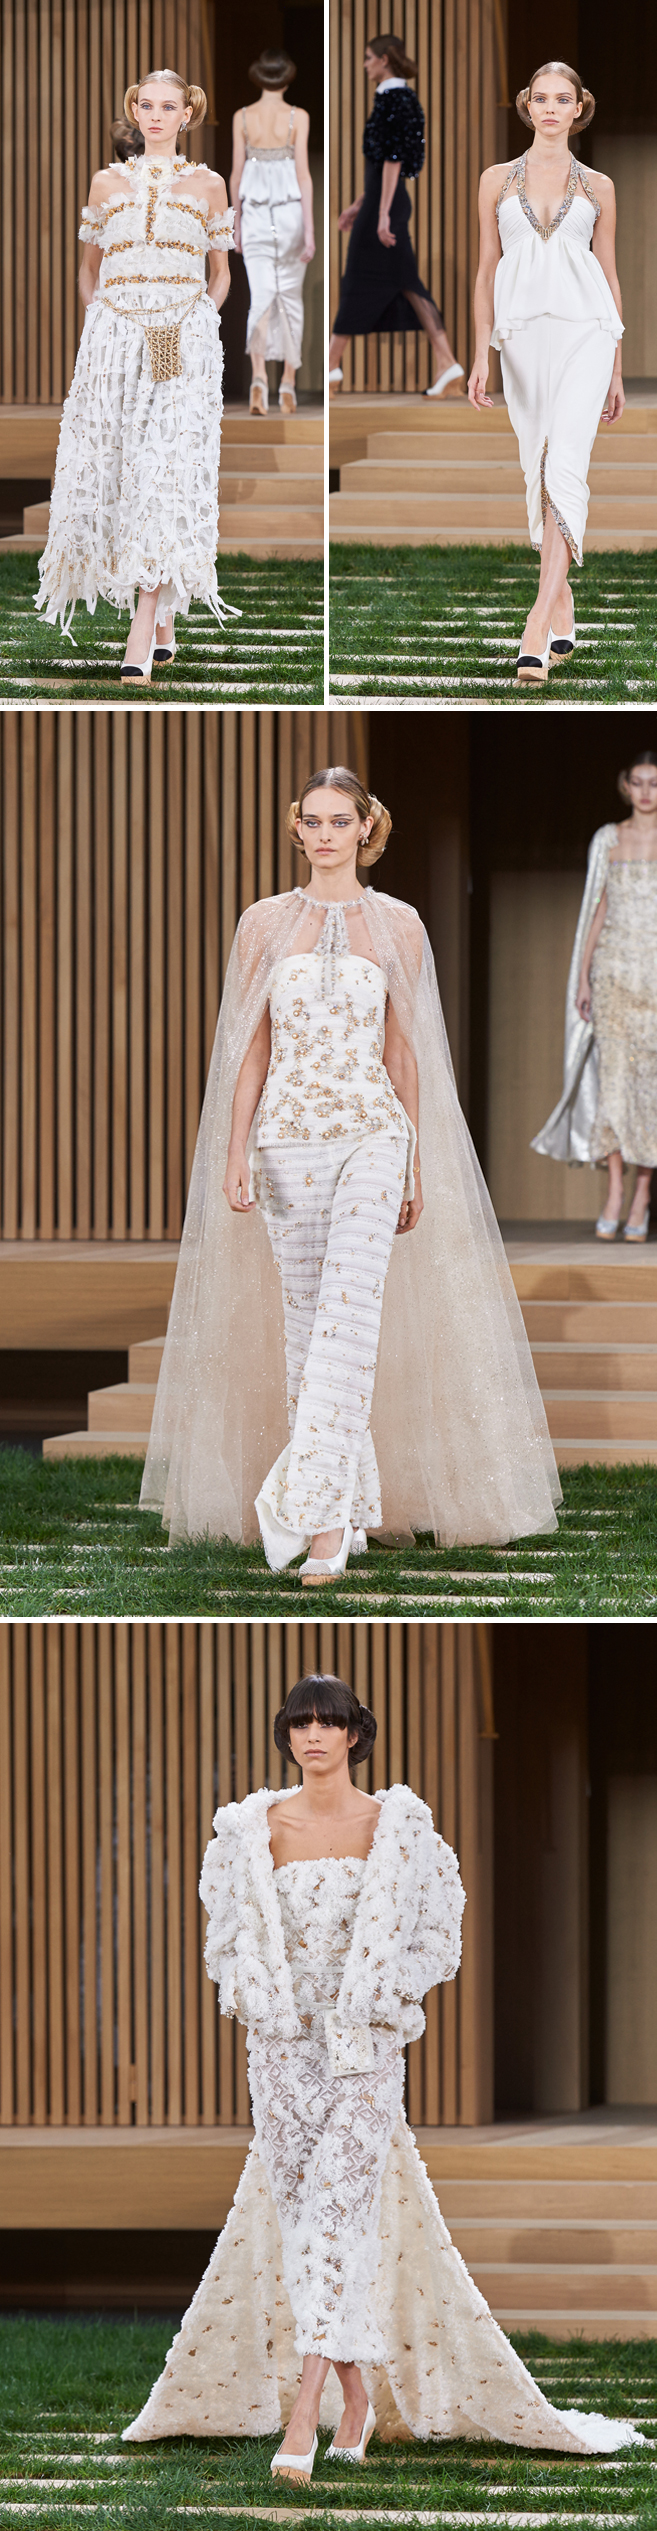 Chanel, Chanel Spring Summer 2016, Haute Couture, Chanel Haute Couture, Perfect Wedding Magazine, Perfect Wedding Blog, Couture Bride